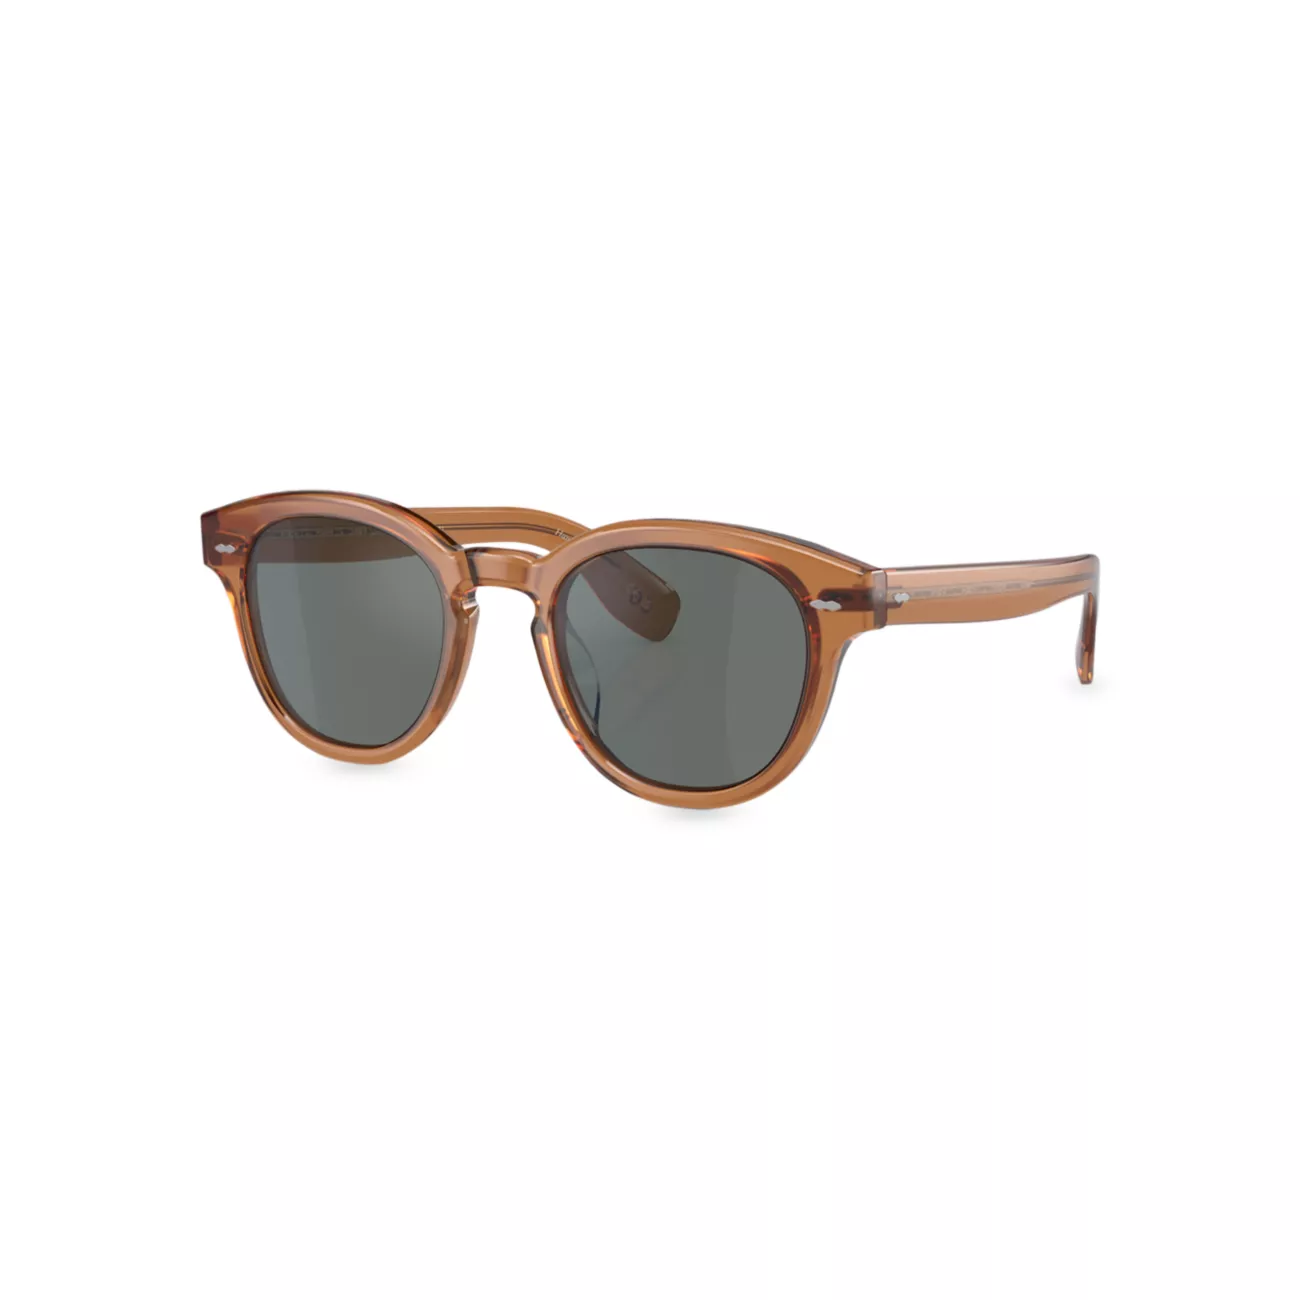 Cary Grant 50MM Pillow Sunglasses Oliver Peoples